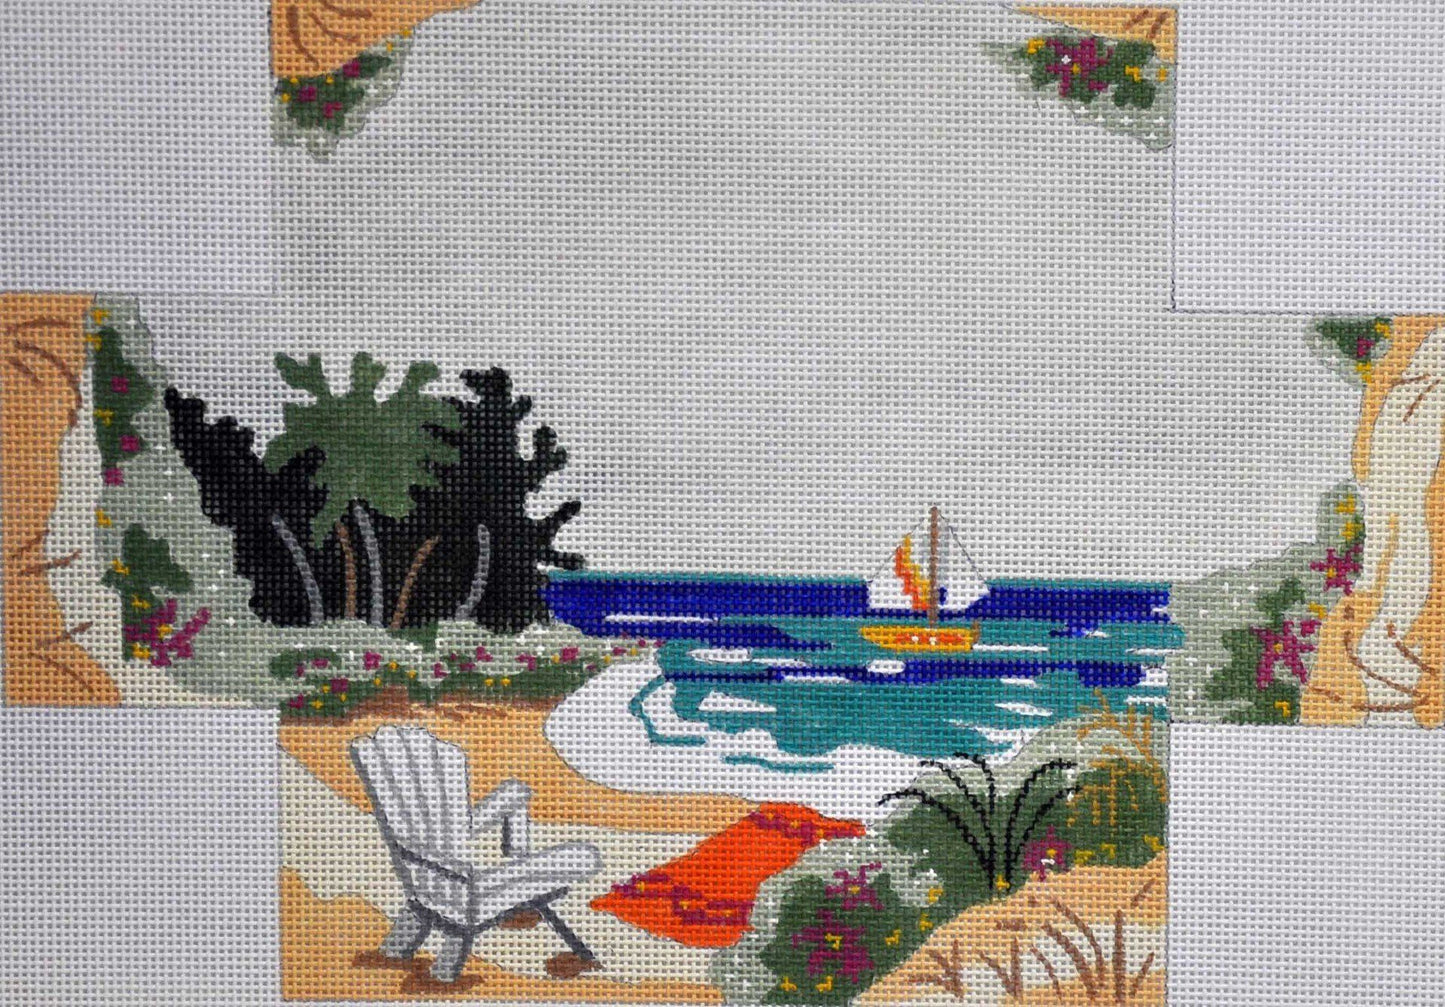 At the Beach Brick Cover Painted Canvas Julie Mar Needlepoint Designs 